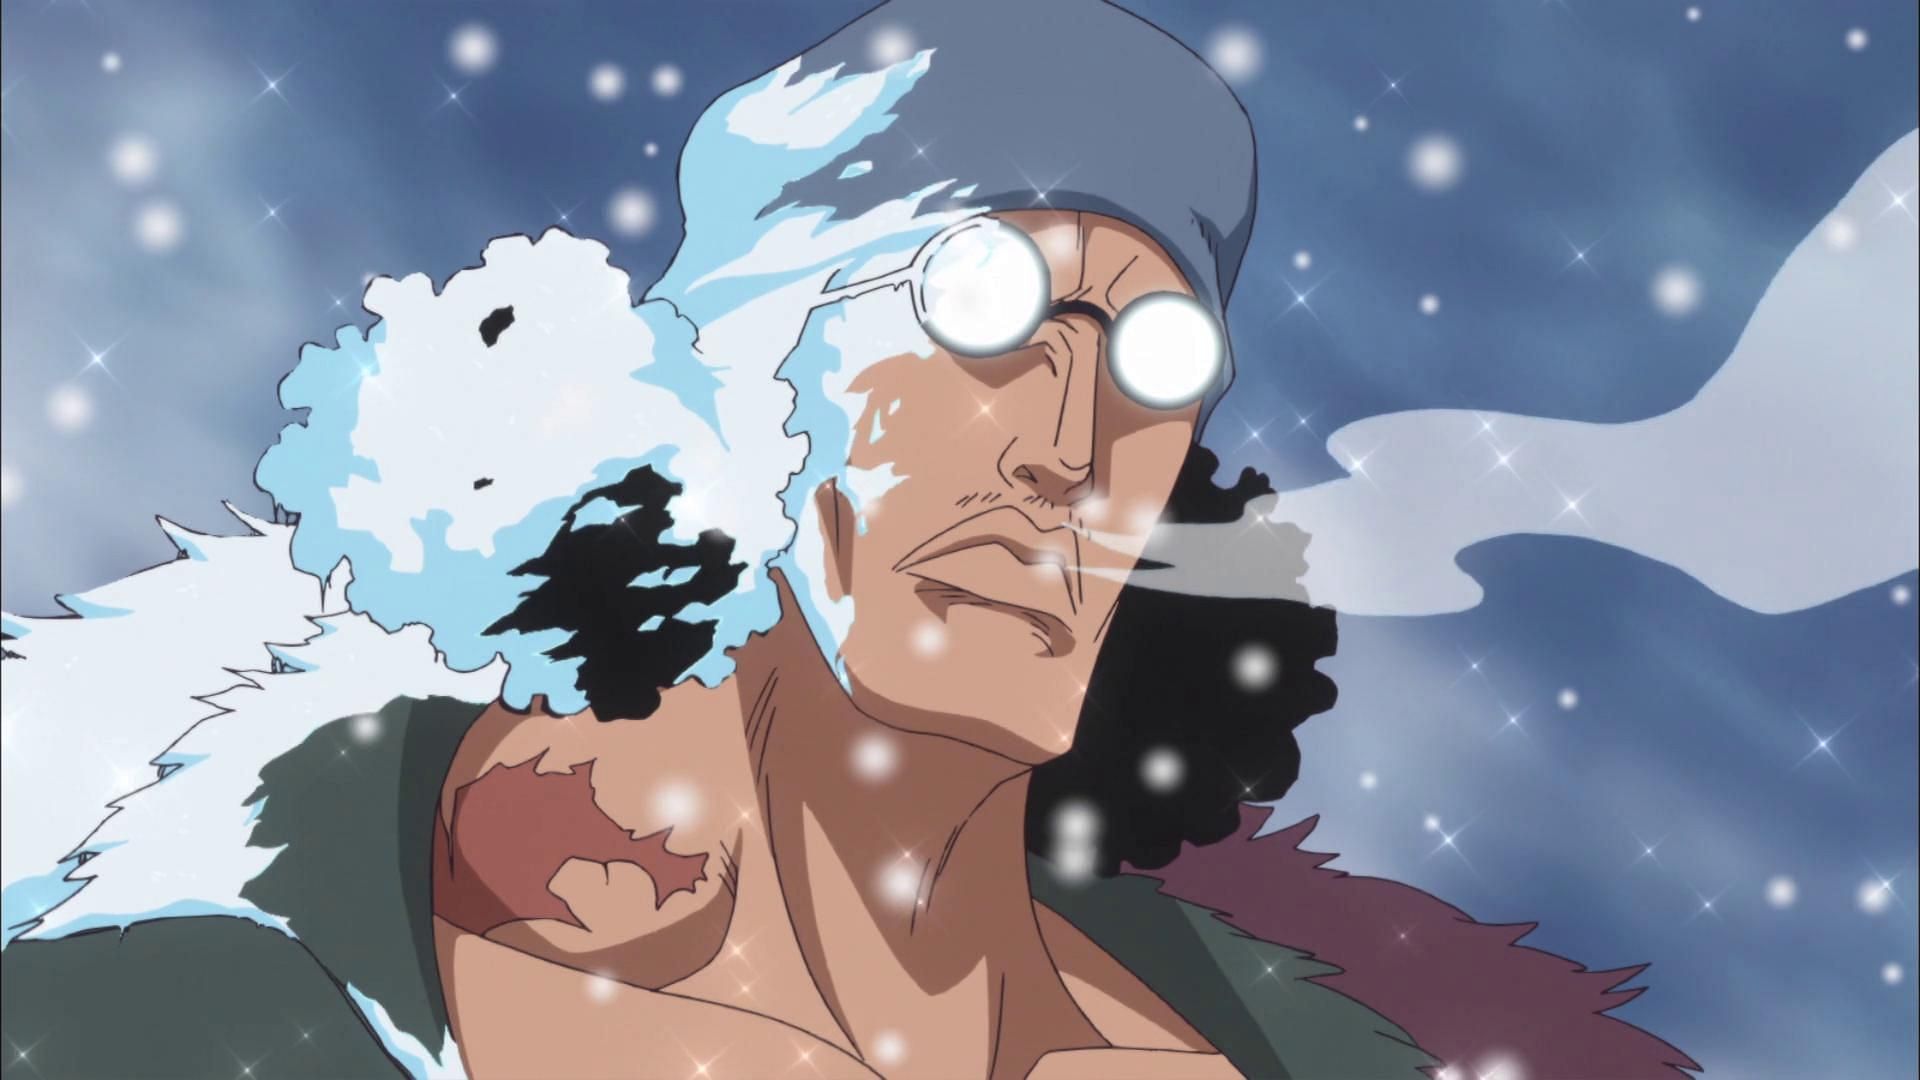 Kuzan makes his first appearance following his victory over Monkey D. Garp (Image via Toei Animation)